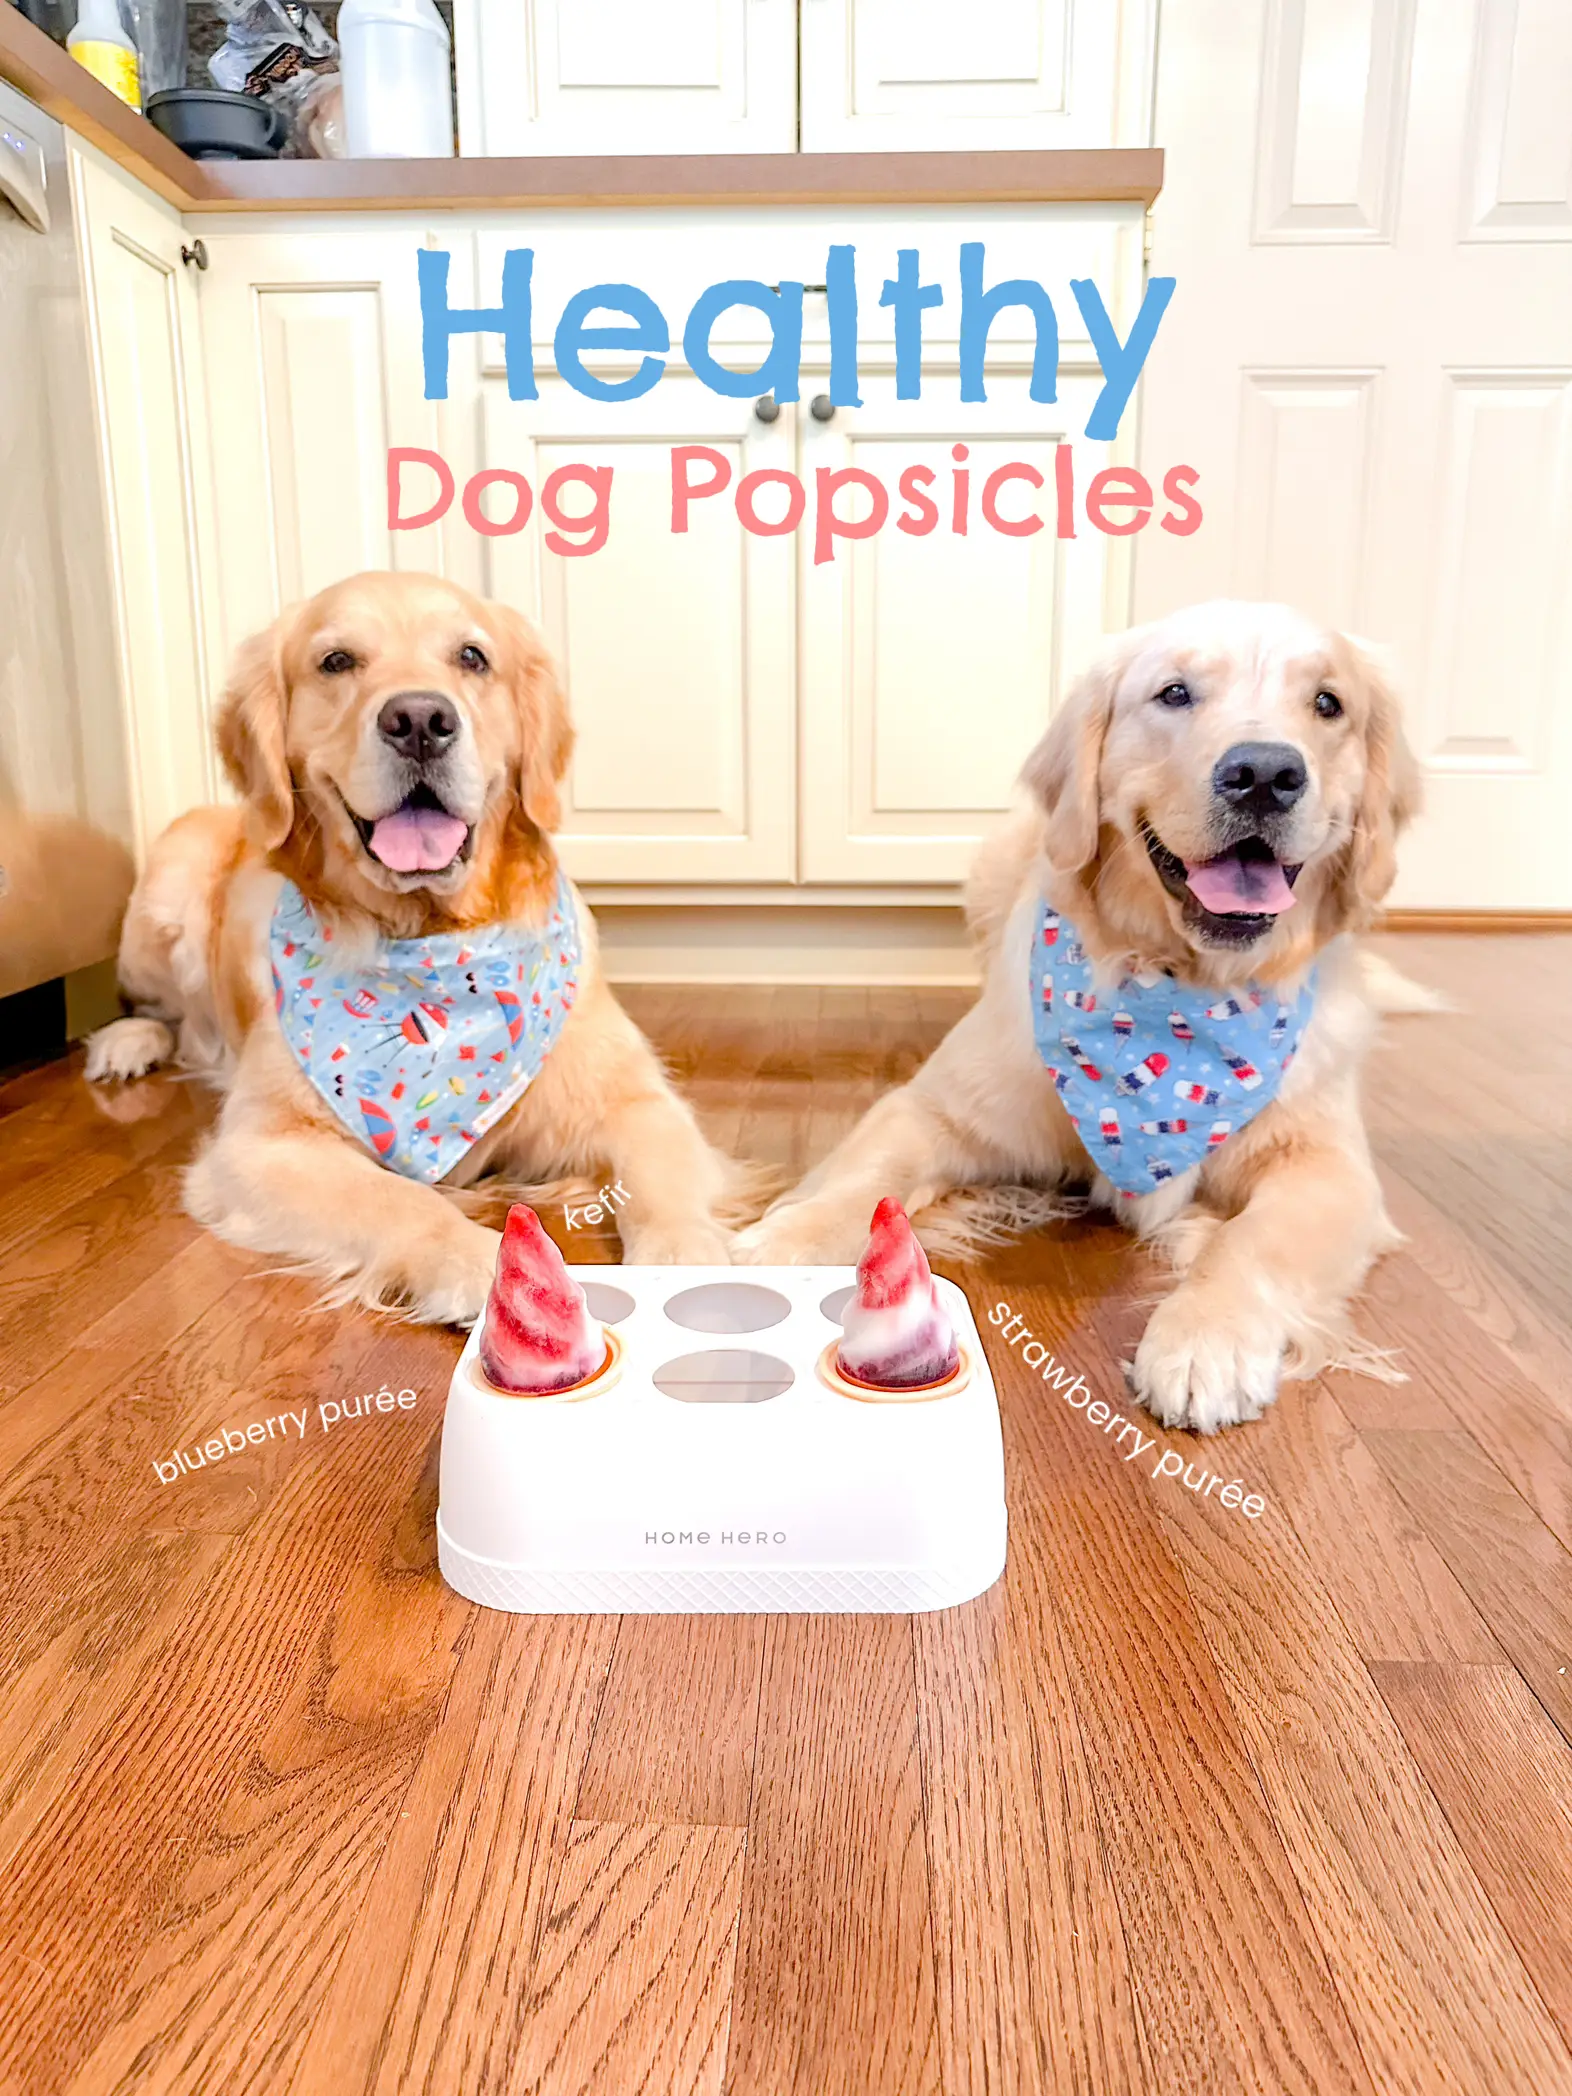 Healthy Popsicle Recipes for Your Dog – Sweet and Spicy Monkey